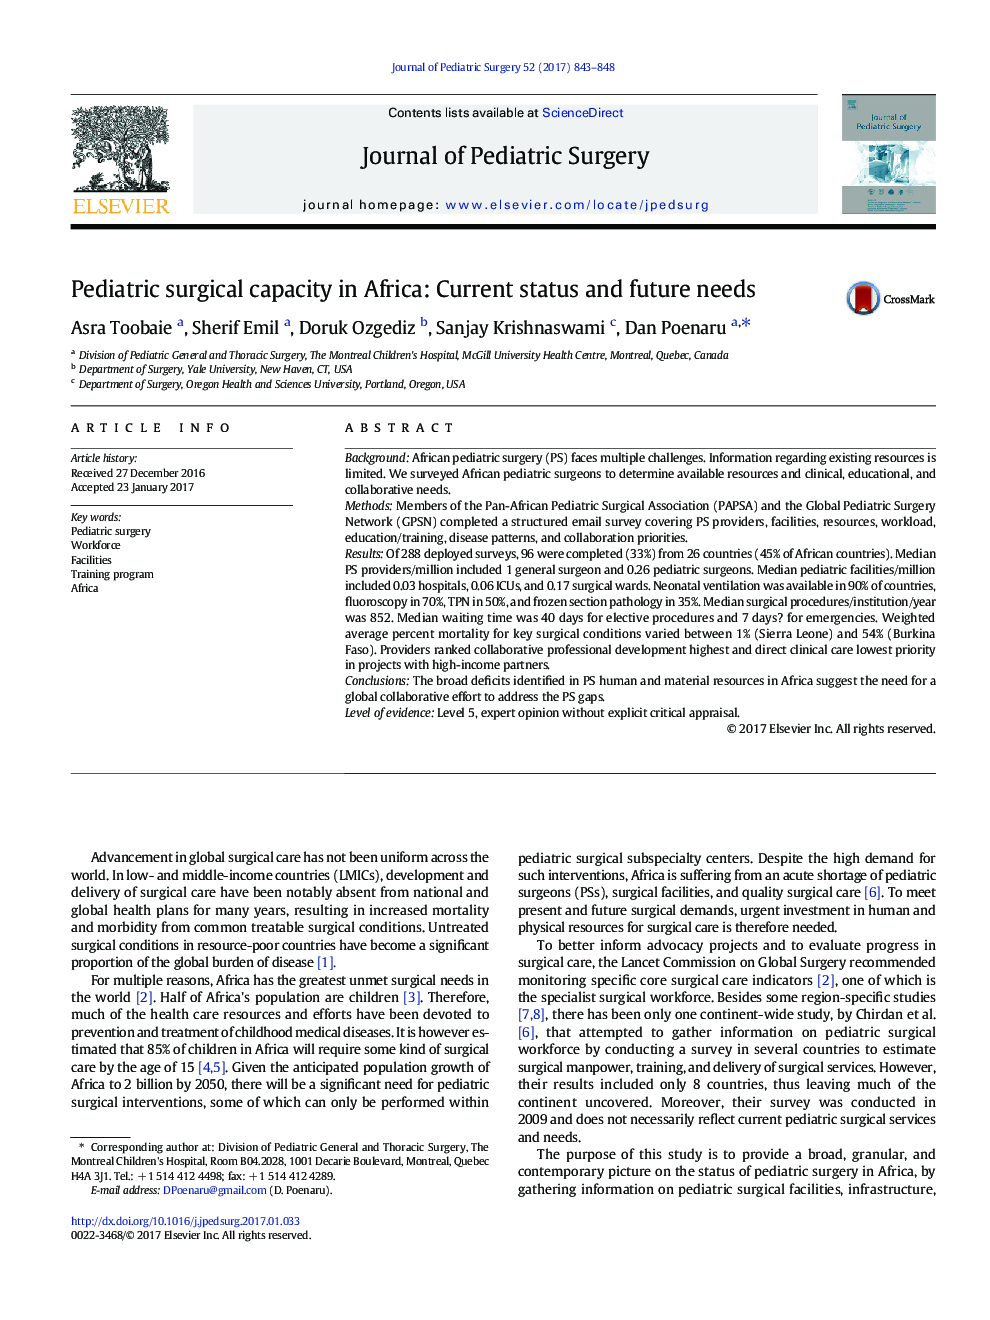 CAPS PaperPediatric surgical capacity in Africa: Current status and future needs